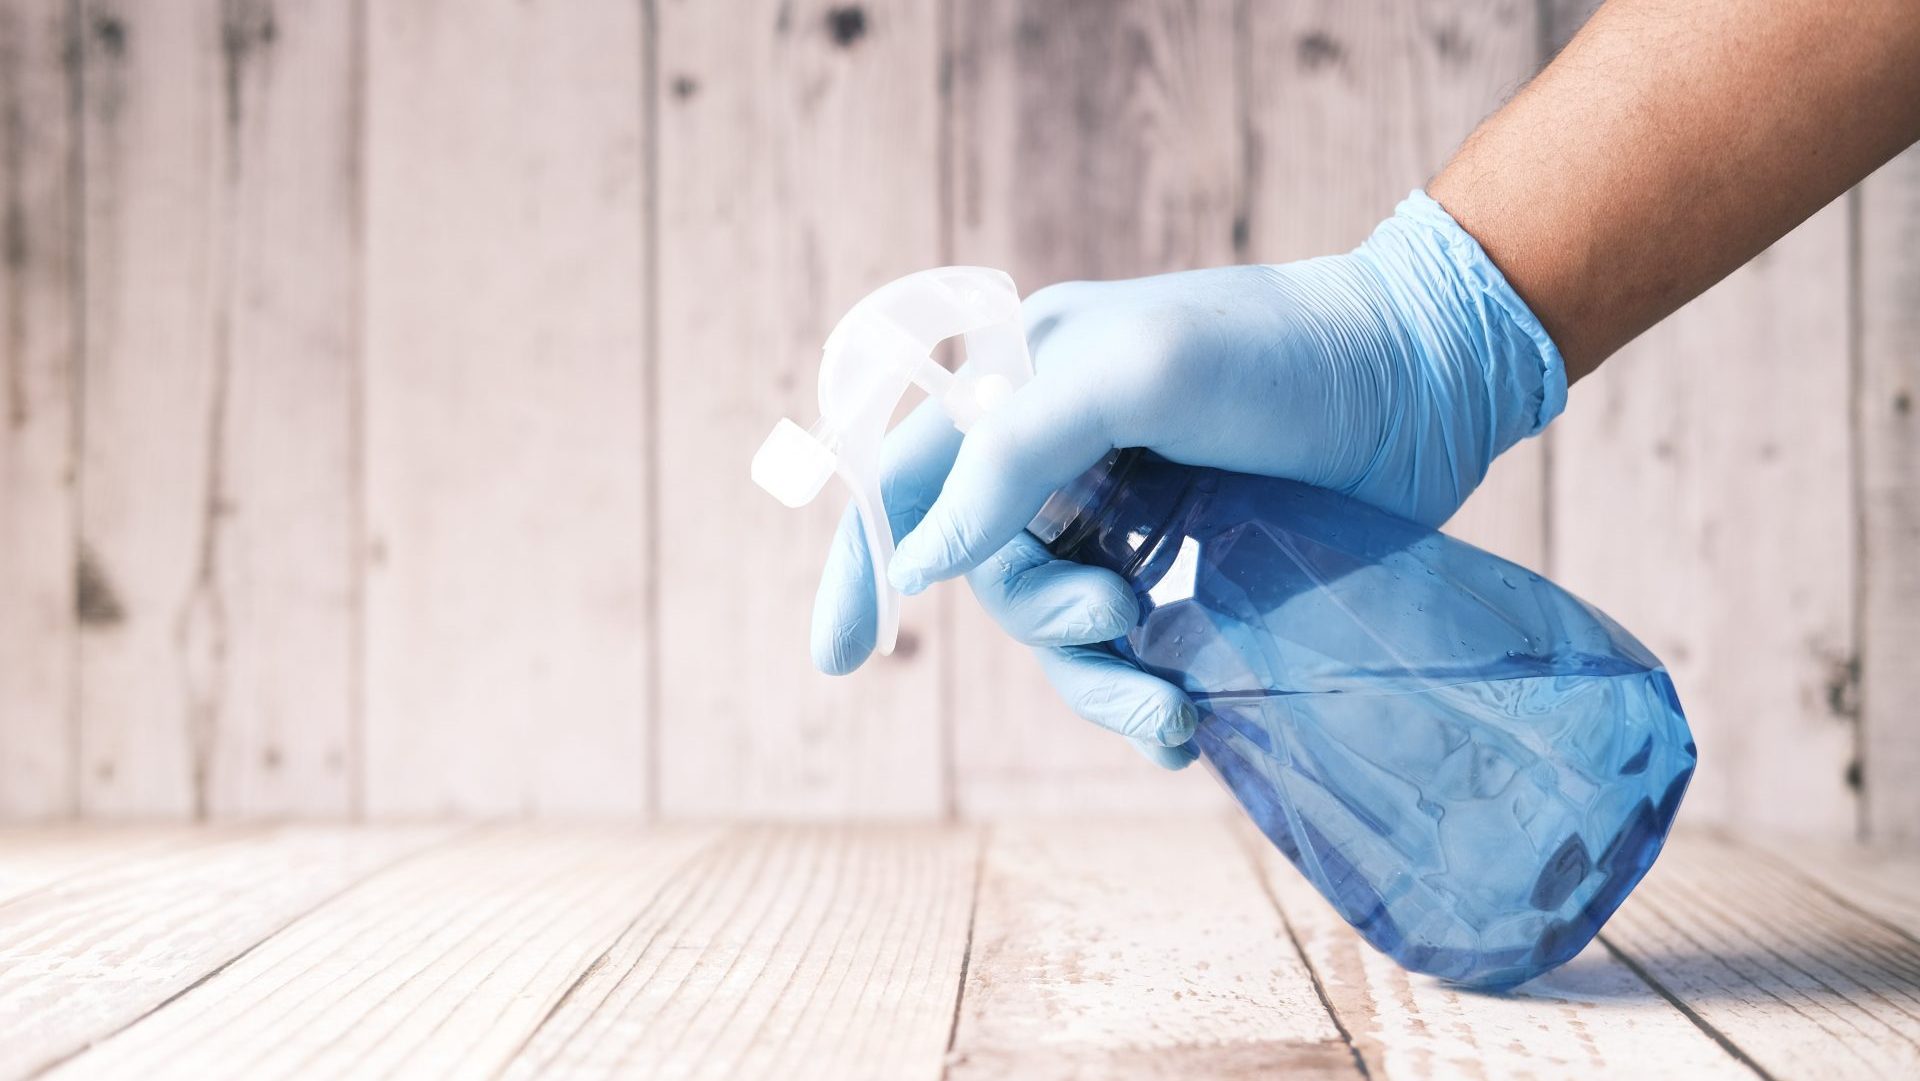 Detail-oriented cleaning experts using state-of-the-art equipment and good-quality products to achieve spotless and hygienic results in homes or businesses